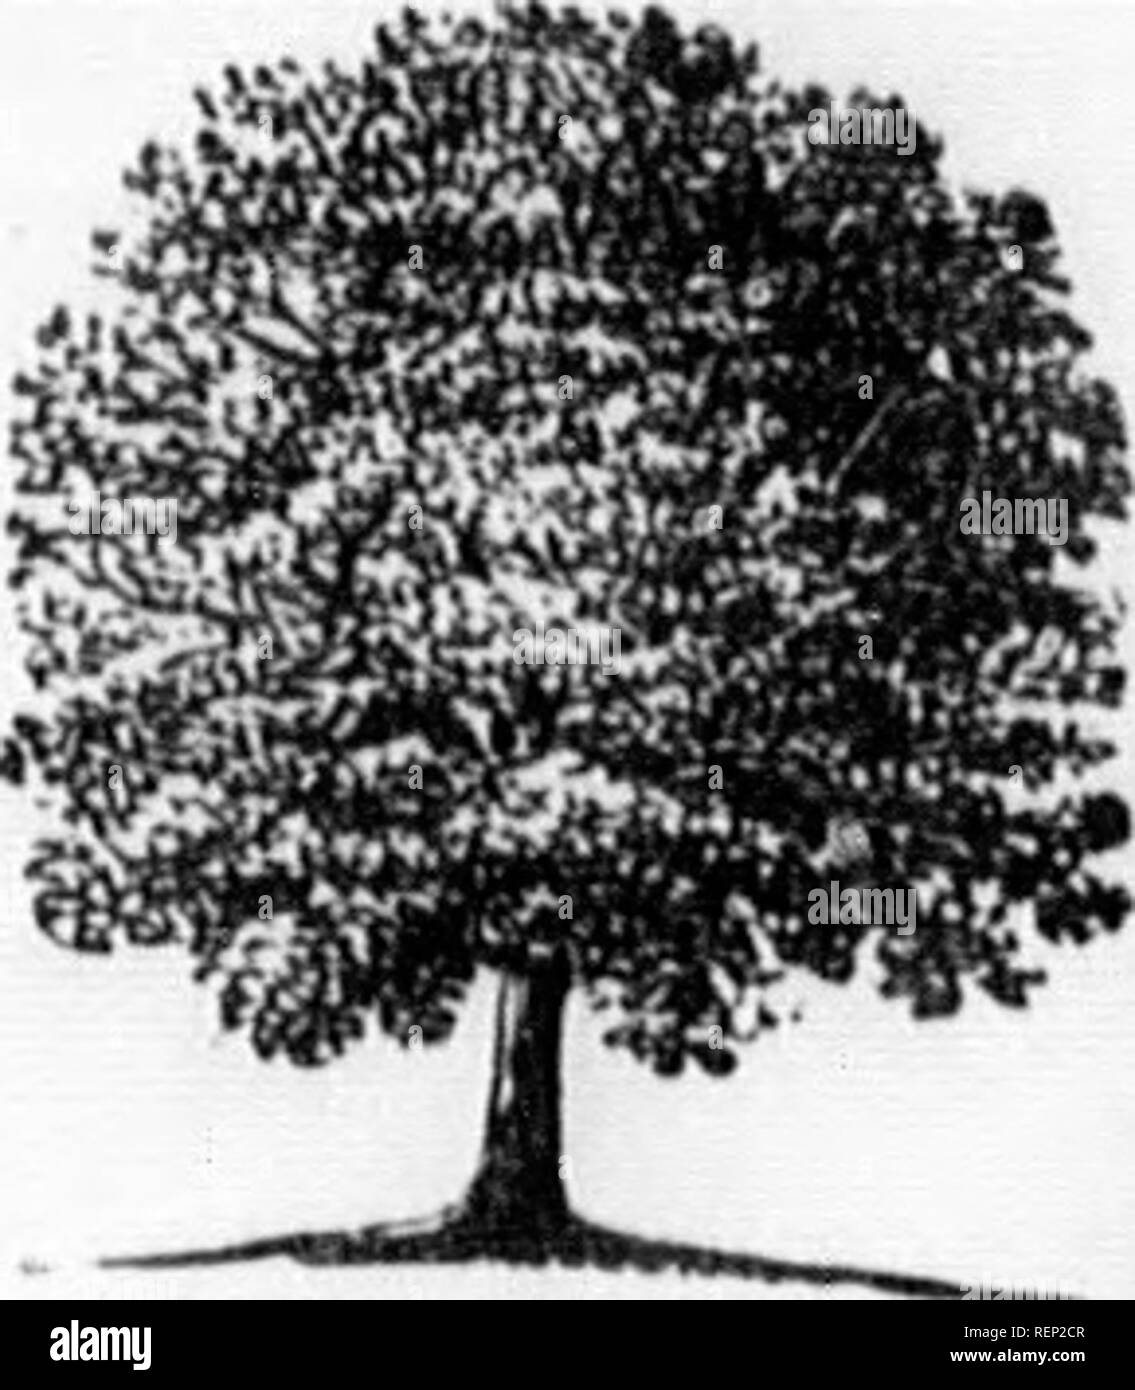 . The trees of America [microform] : native and foreign, pictorially and botanically delineated and scientifically and popularly described, being considered principally with reference to their geography and history, soil and situation, propagation and culture, accidents and diseases .... Trees; Arbres. Ace7' taiaricum, THE TARTARIAN MAPLE. Synonymes. Acer tataricum, Erable de Tartarie, Tartarischer Ahorn, Zarza-modon, (Locust,) Tartarian Maple, f LrNN^Kus, Species Plantarum. I De Ca.ndolle, Prodromus. ( Loudon, Arboretum Britannicum. France. Germany. RassiA. Britain and Anglo-America.. Engravi Stock Photo